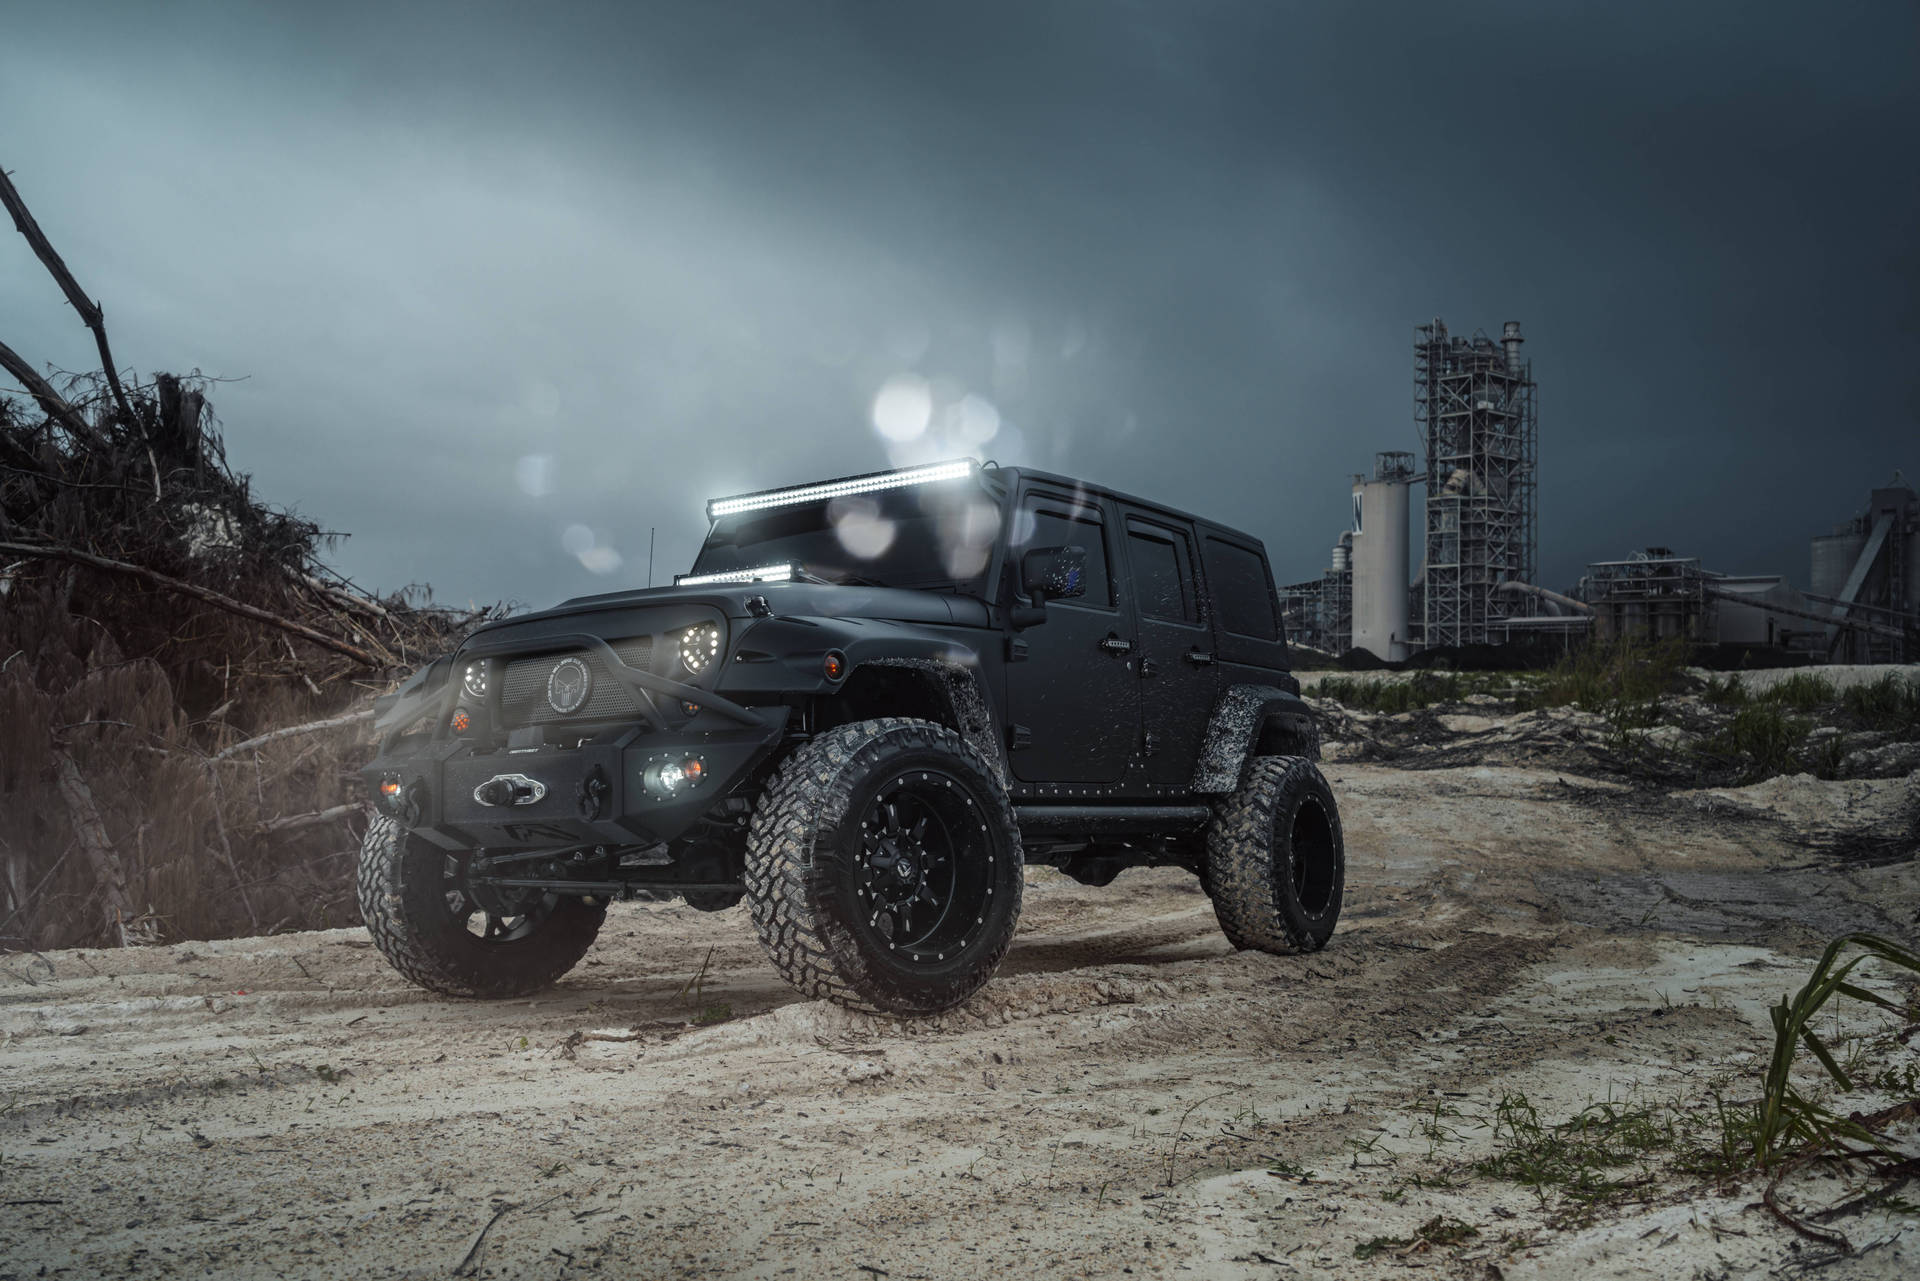 Rugged Black Jeep Wrangler In Construction Site